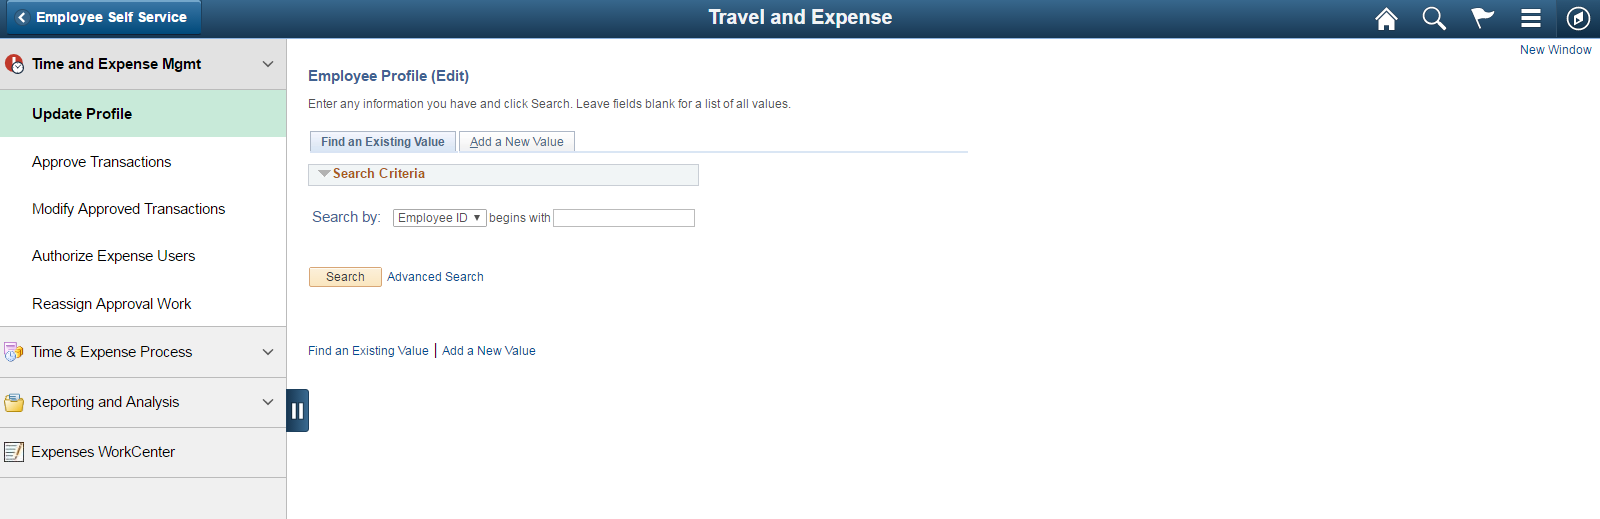 Travel and Expenses Navigation Collections